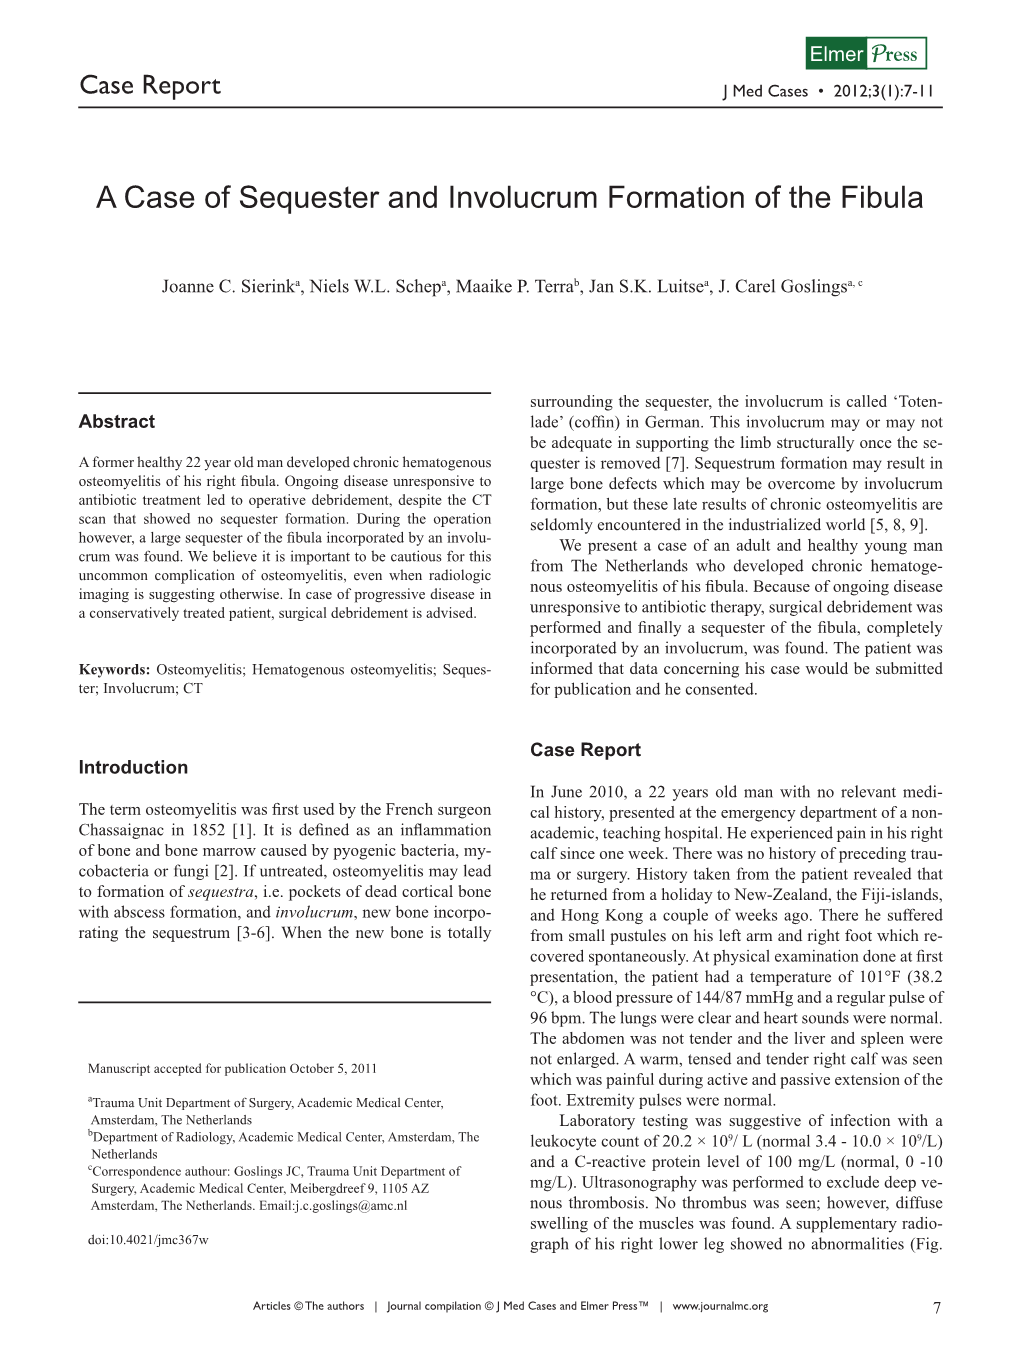 A Case of Sequester and Involucrum Formation of the Fibula